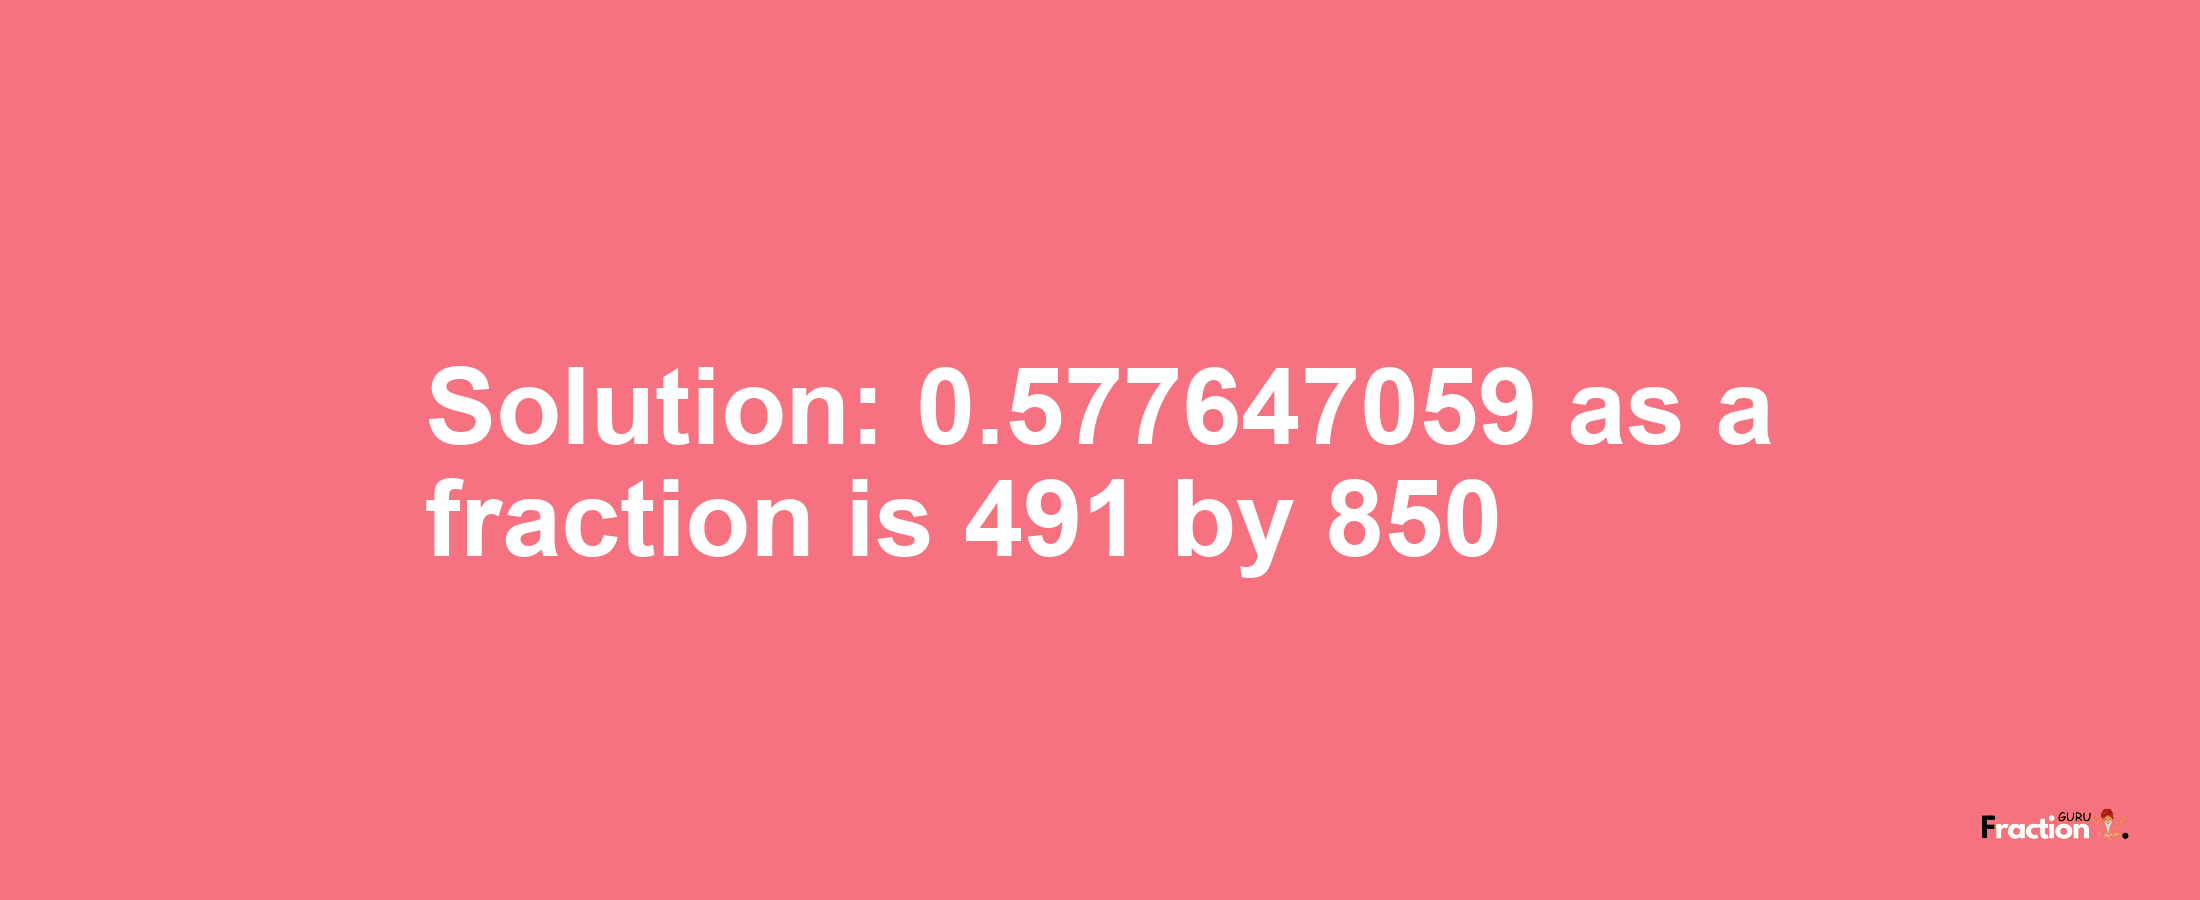 Solution:0.577647059 as a fraction is 491/850